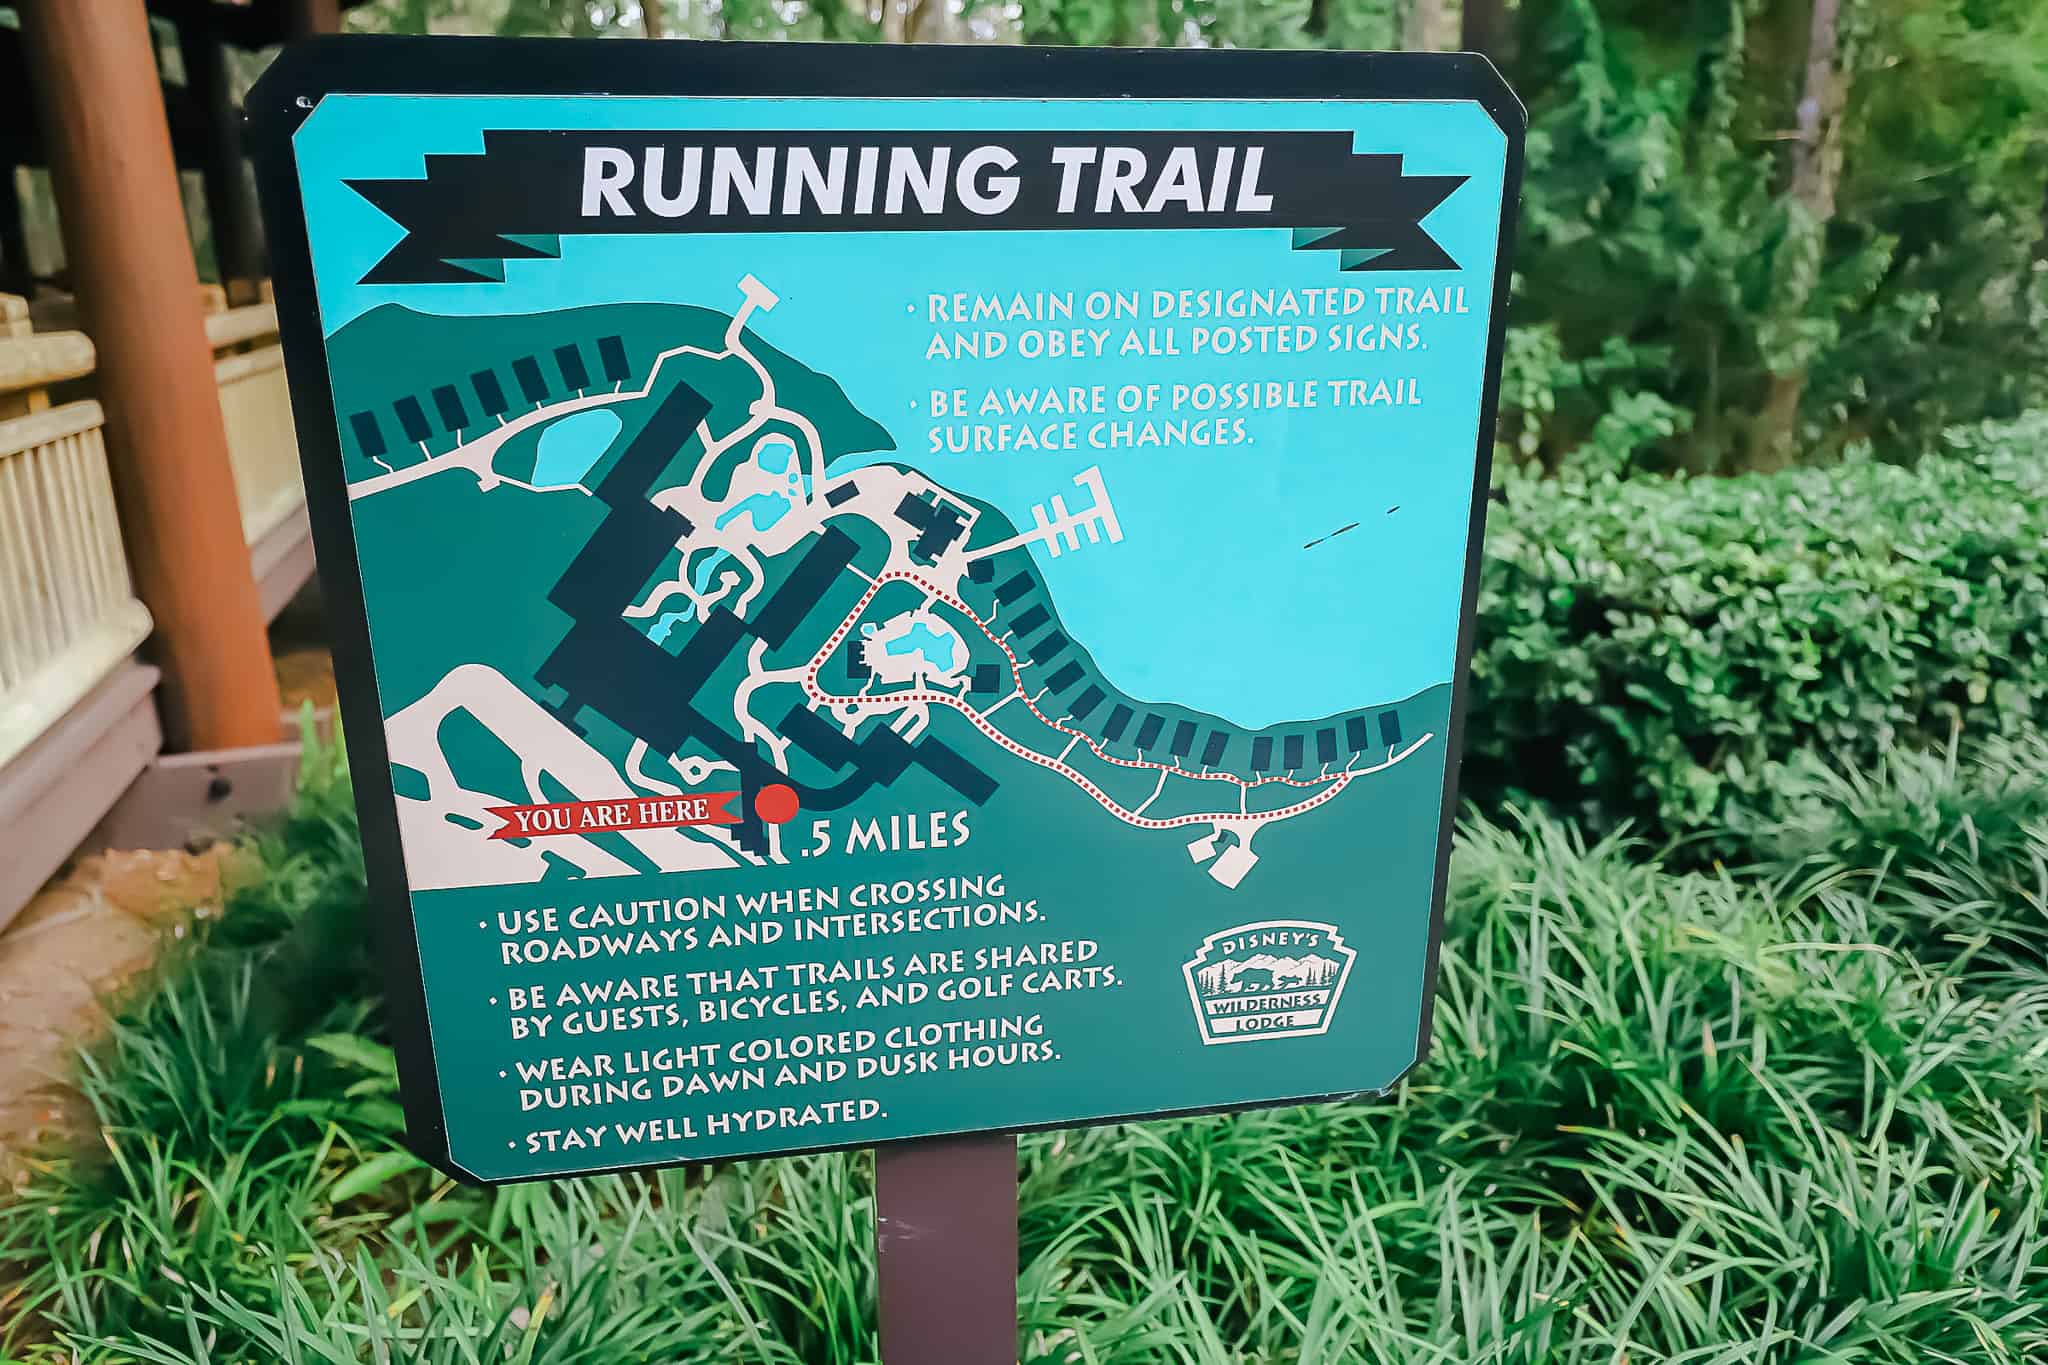 running trail map for Wilderness Lodge at Disney 